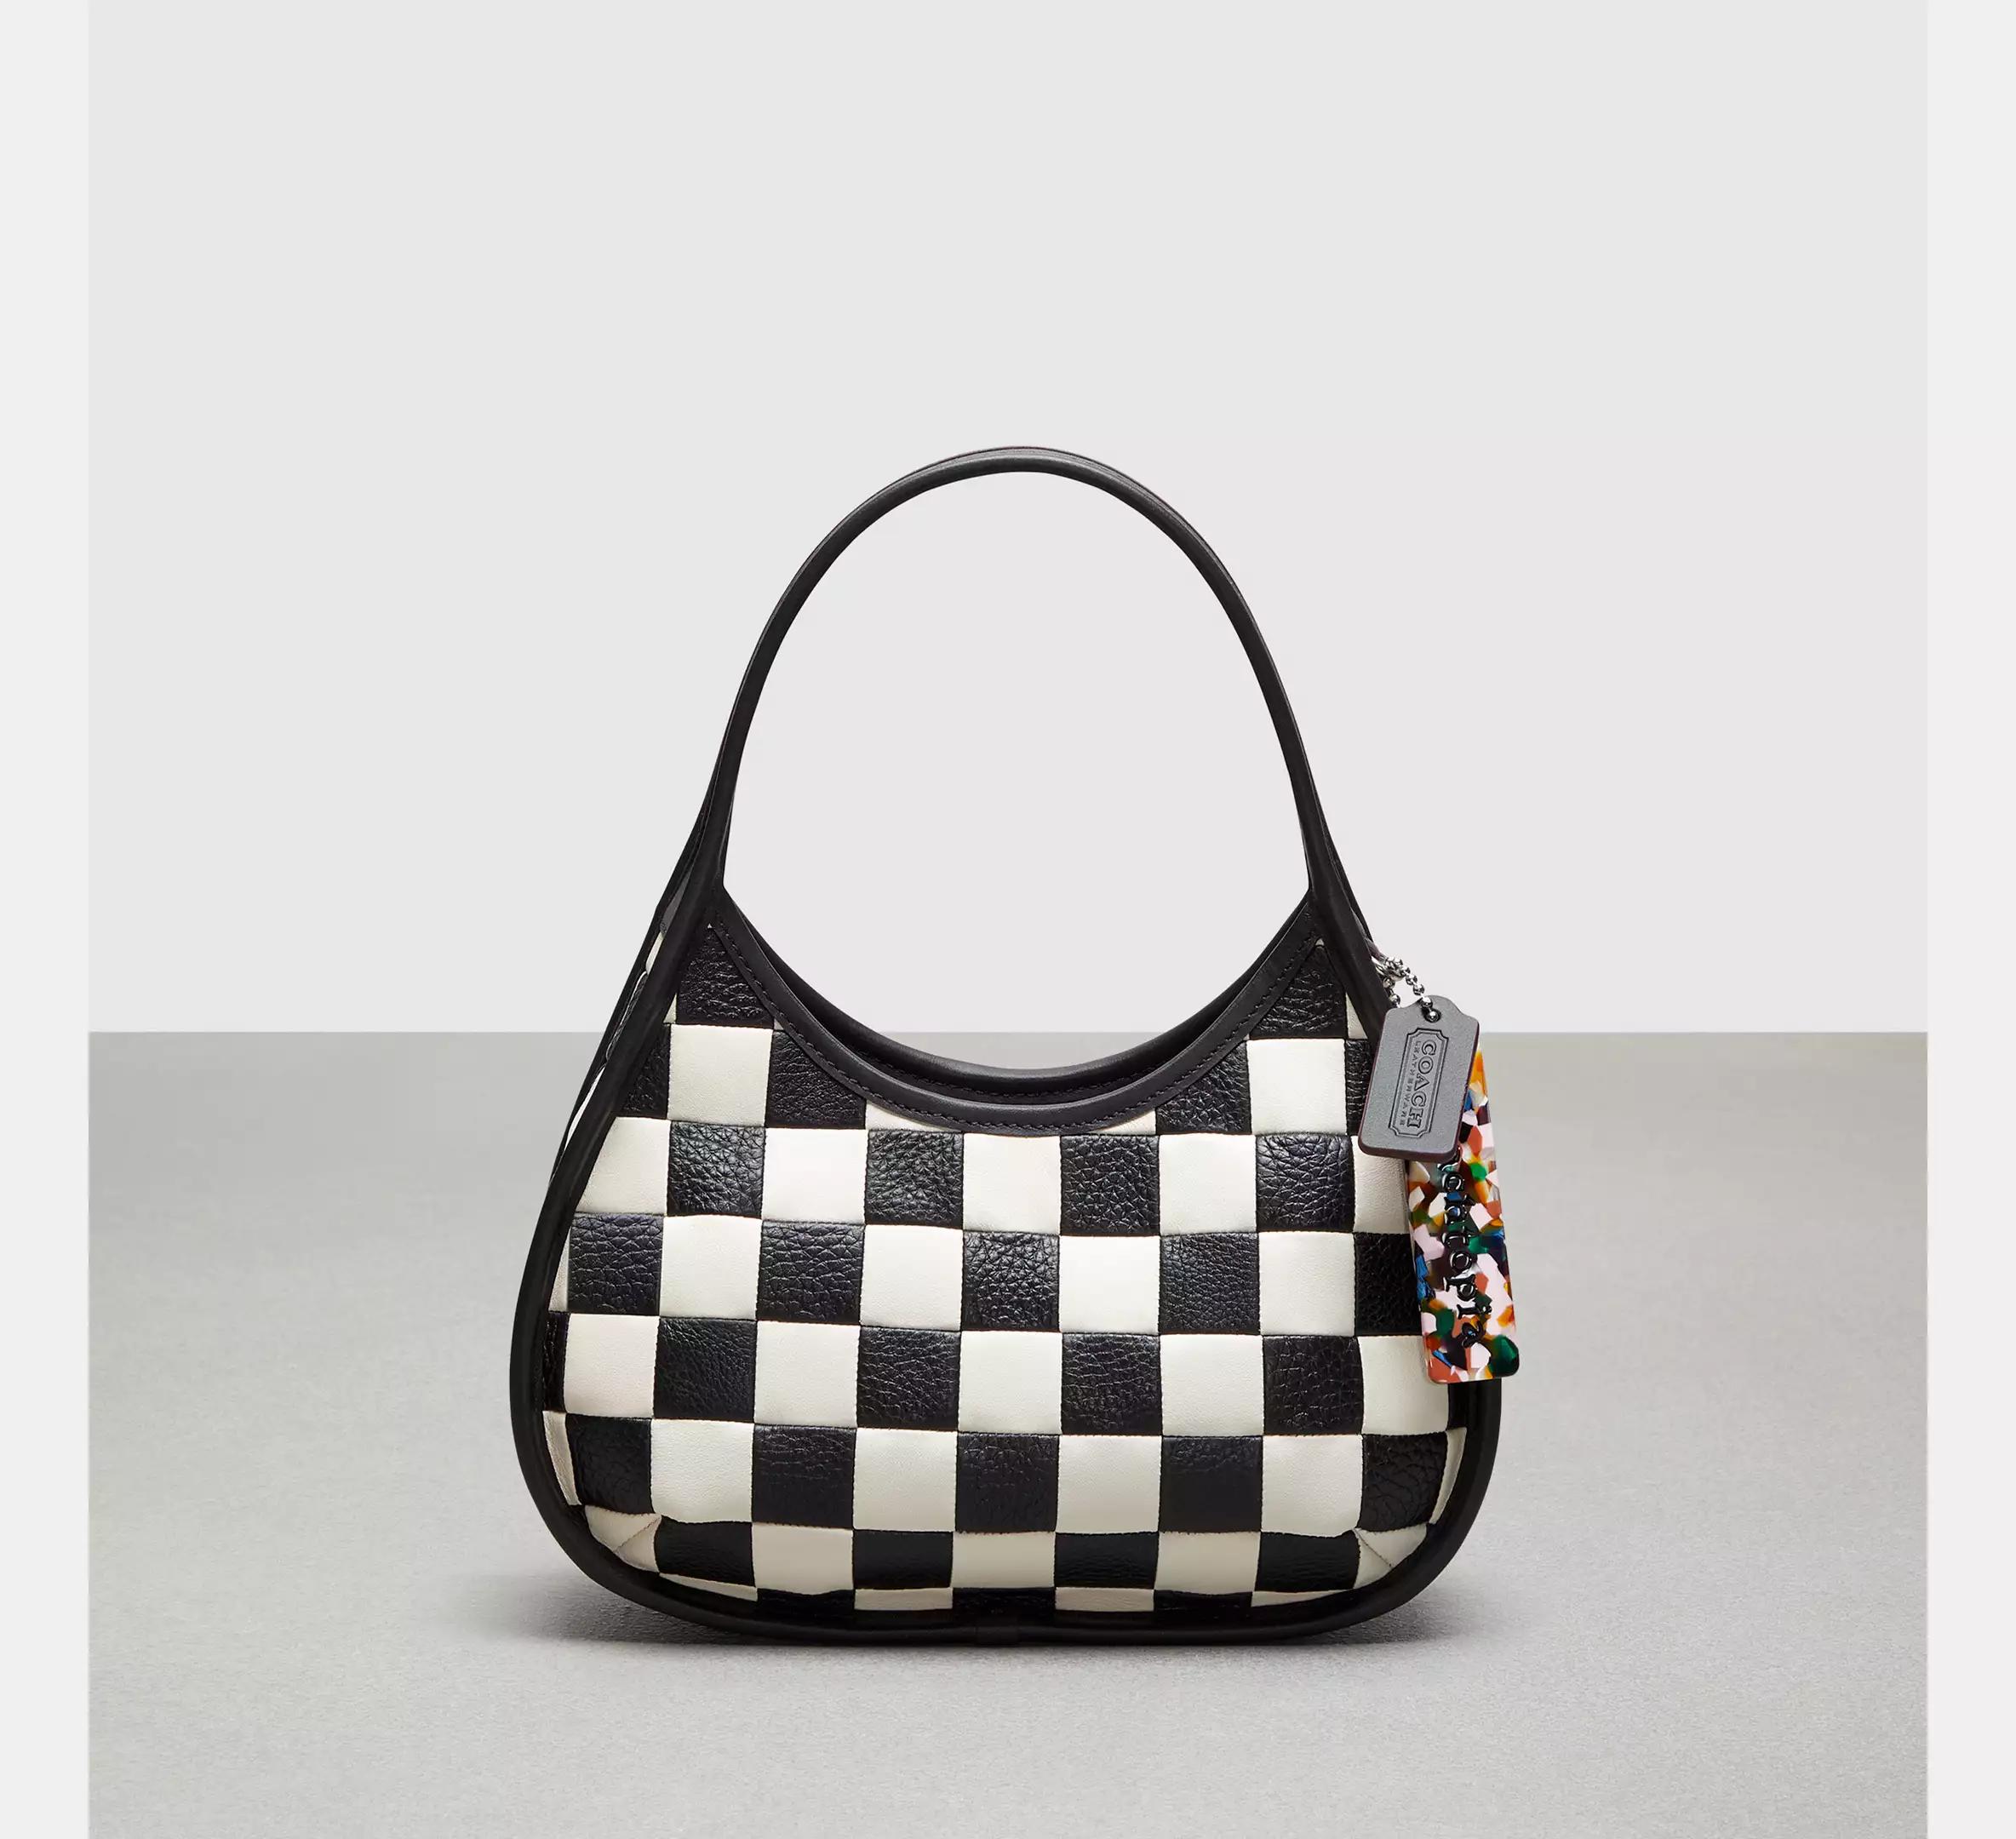 Túi Coach Ergo Bag In Checkerboard Patchwork Upcrafted Leather Nữ Đen